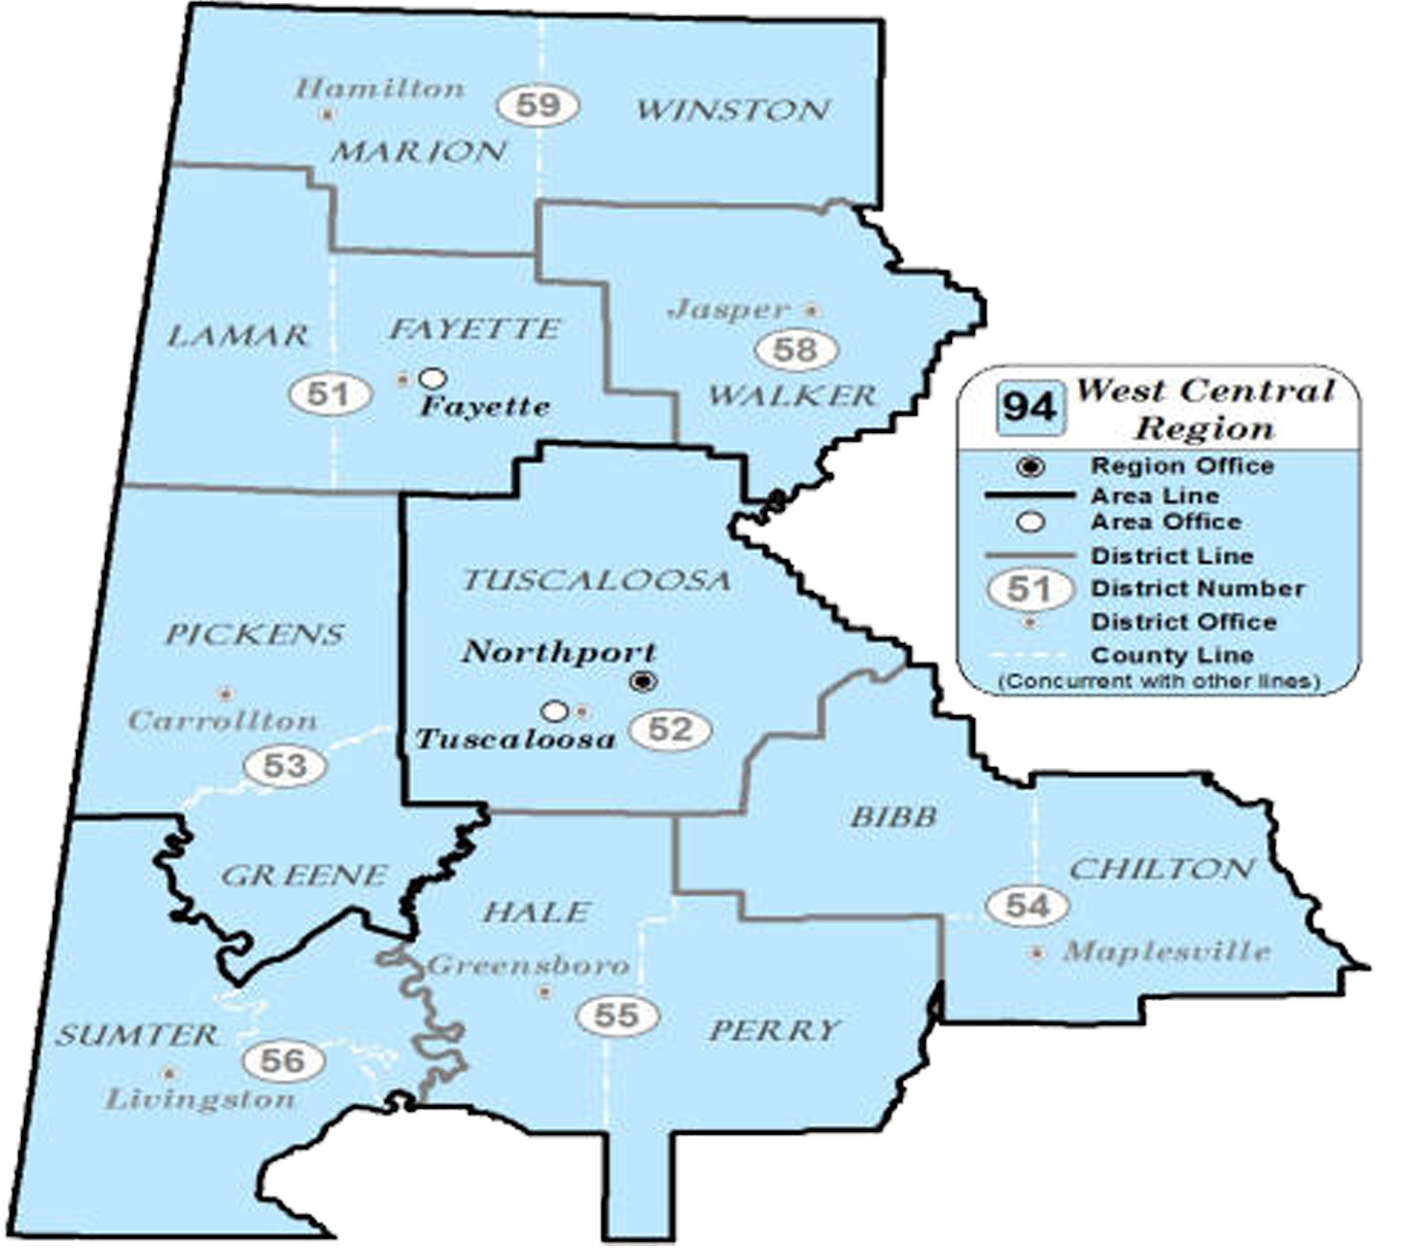 ALDOT Map of West Central Region